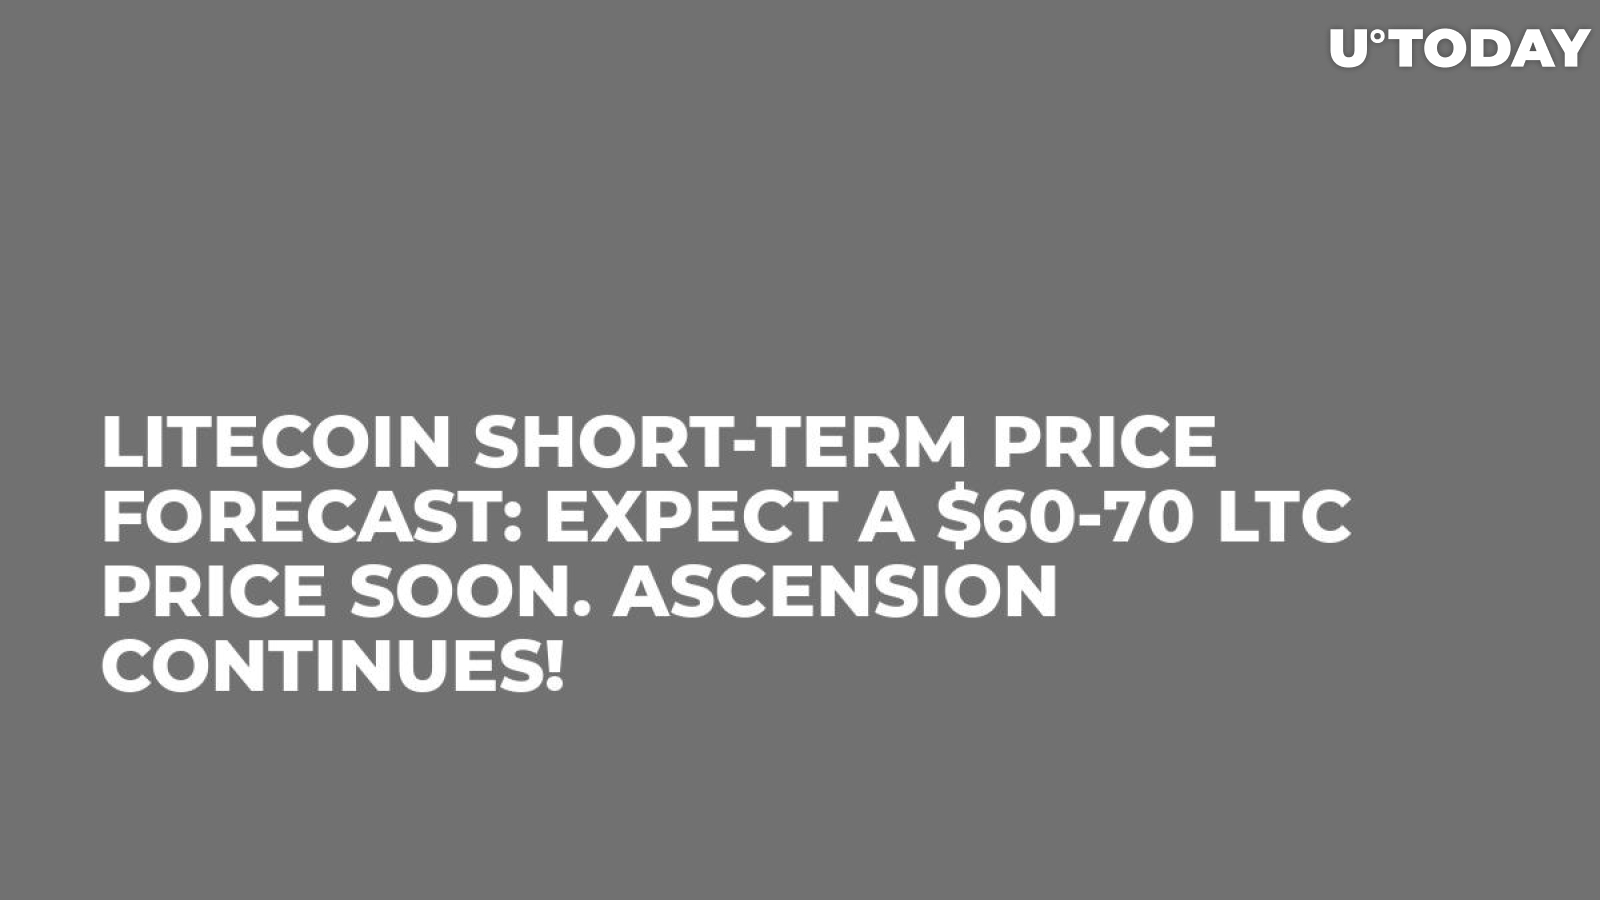 Litecoin Short-Term Price Forecast: Expect a $60-70 LTC Price Soon. Ascension Continues!